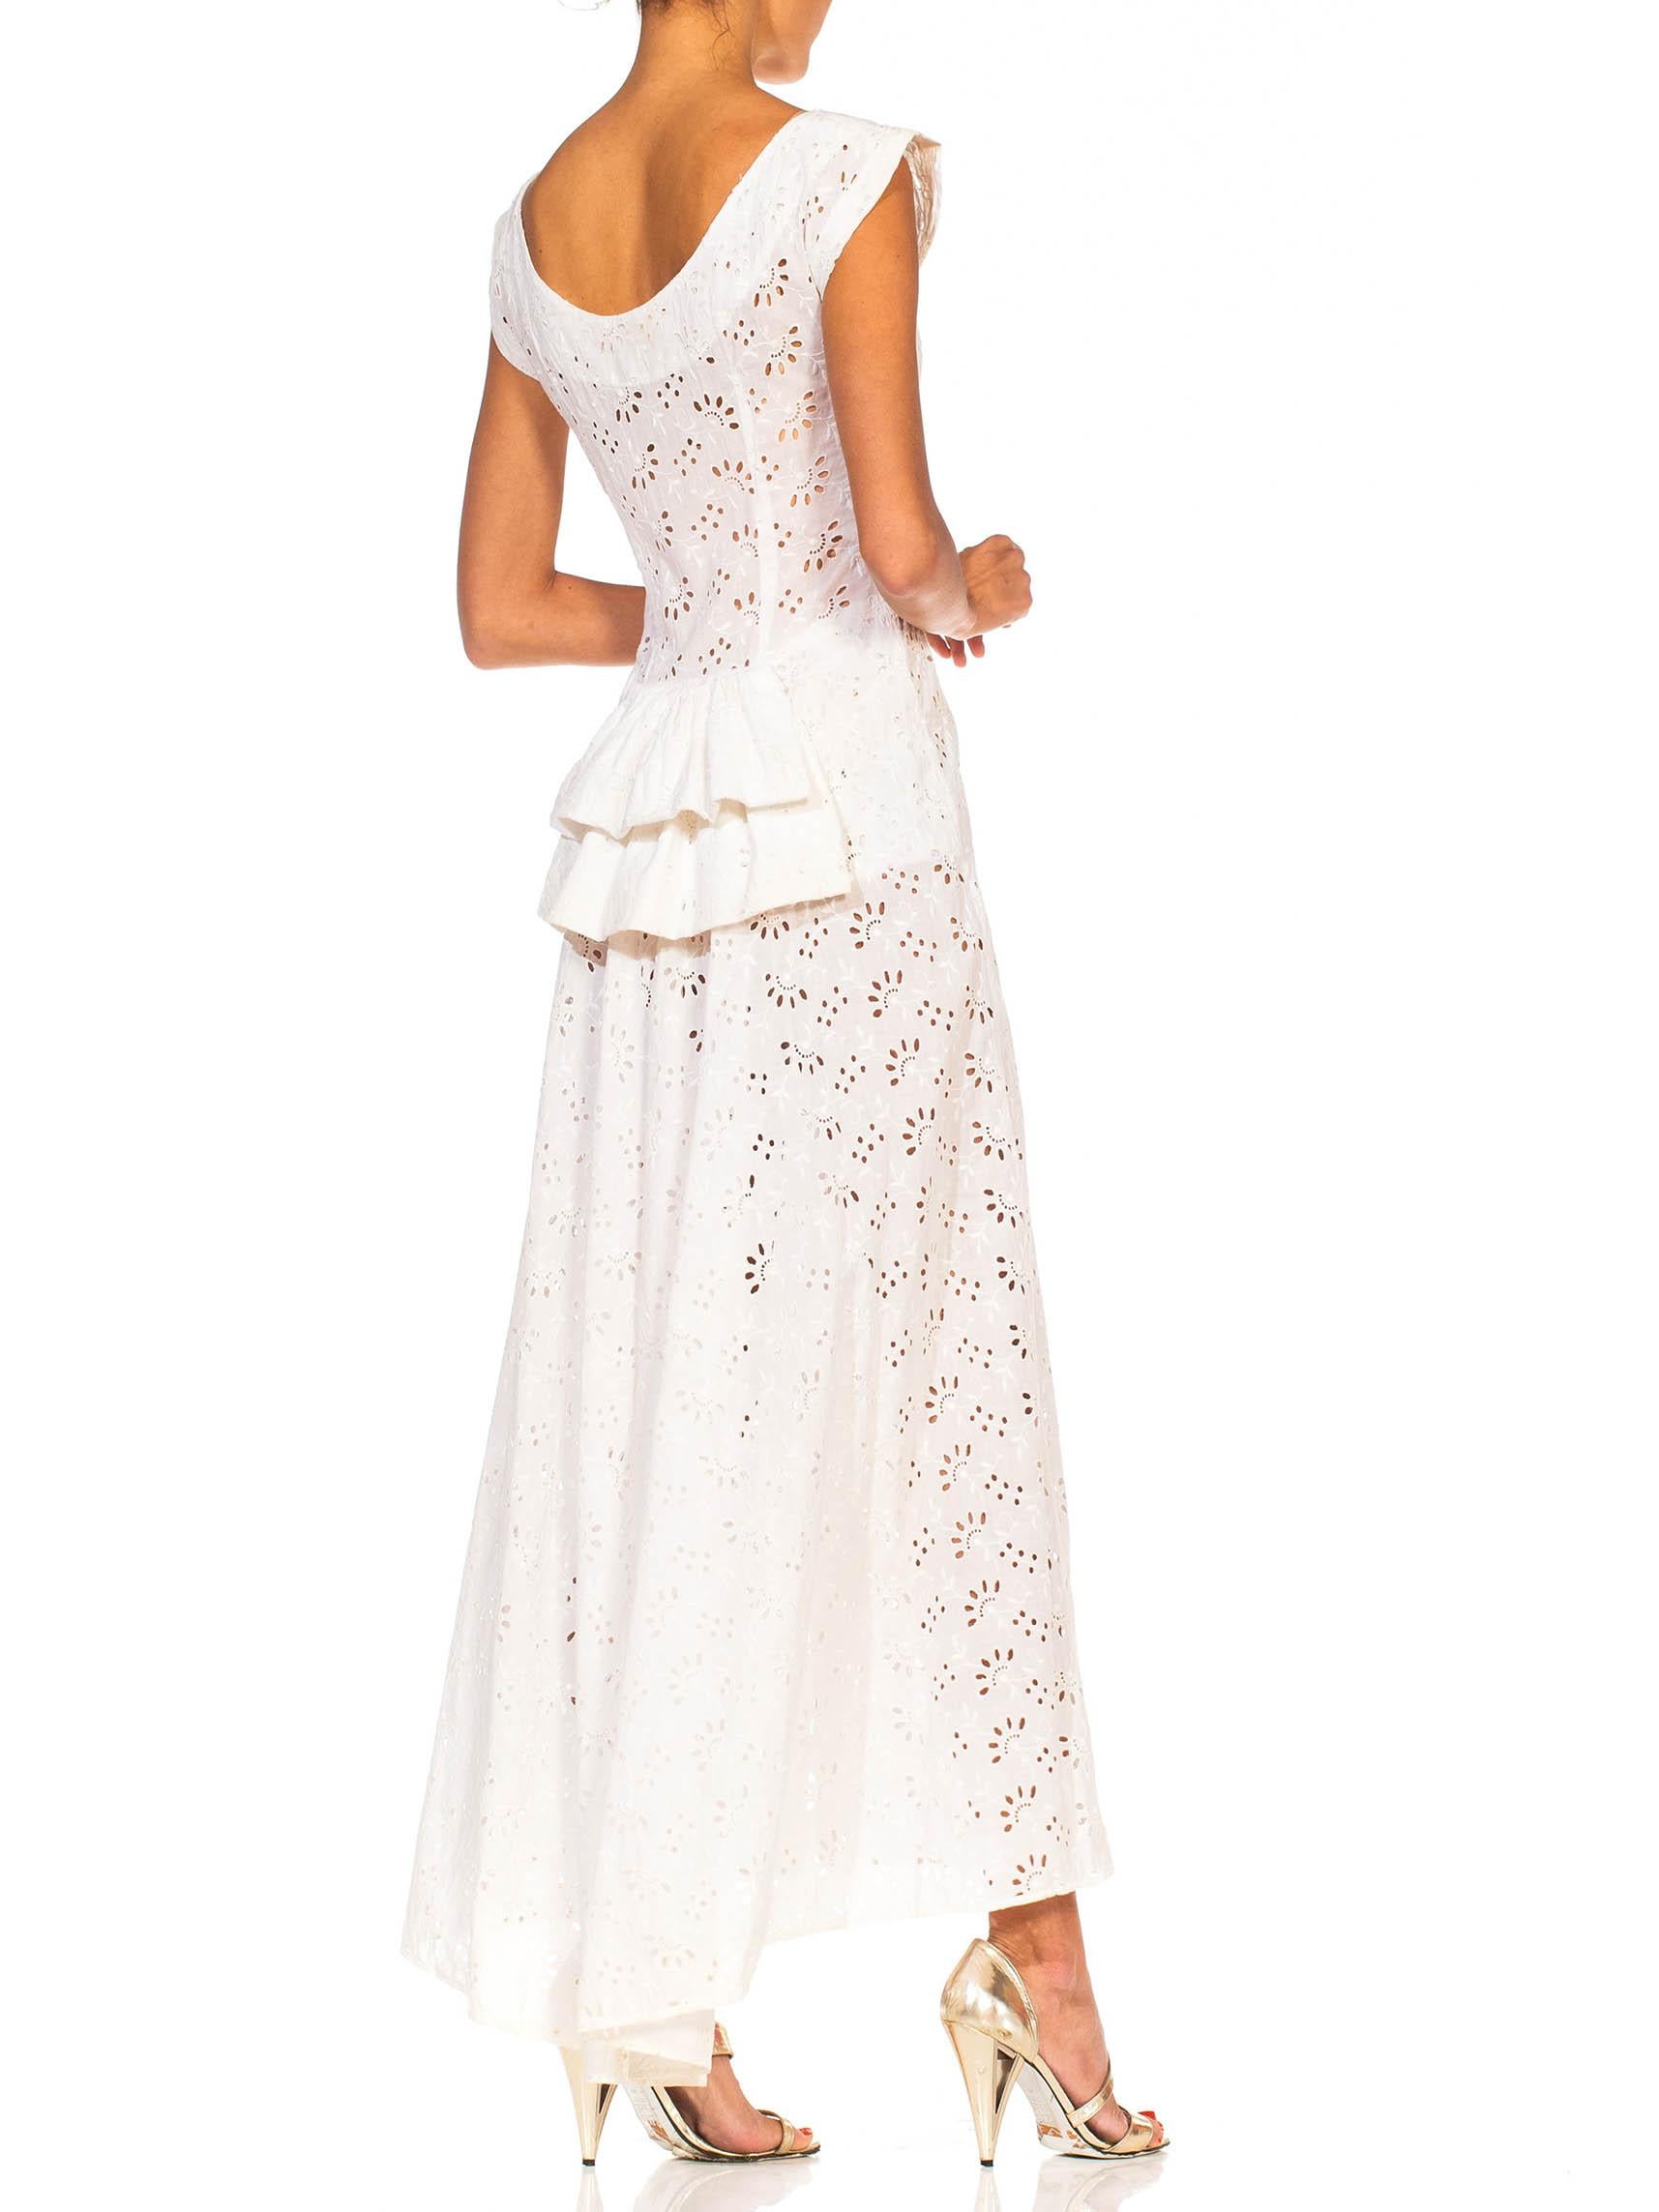 1930S White Cotton Eyelet Lace Summer Lawn Party Dress With Mini Bustle For Sale 5